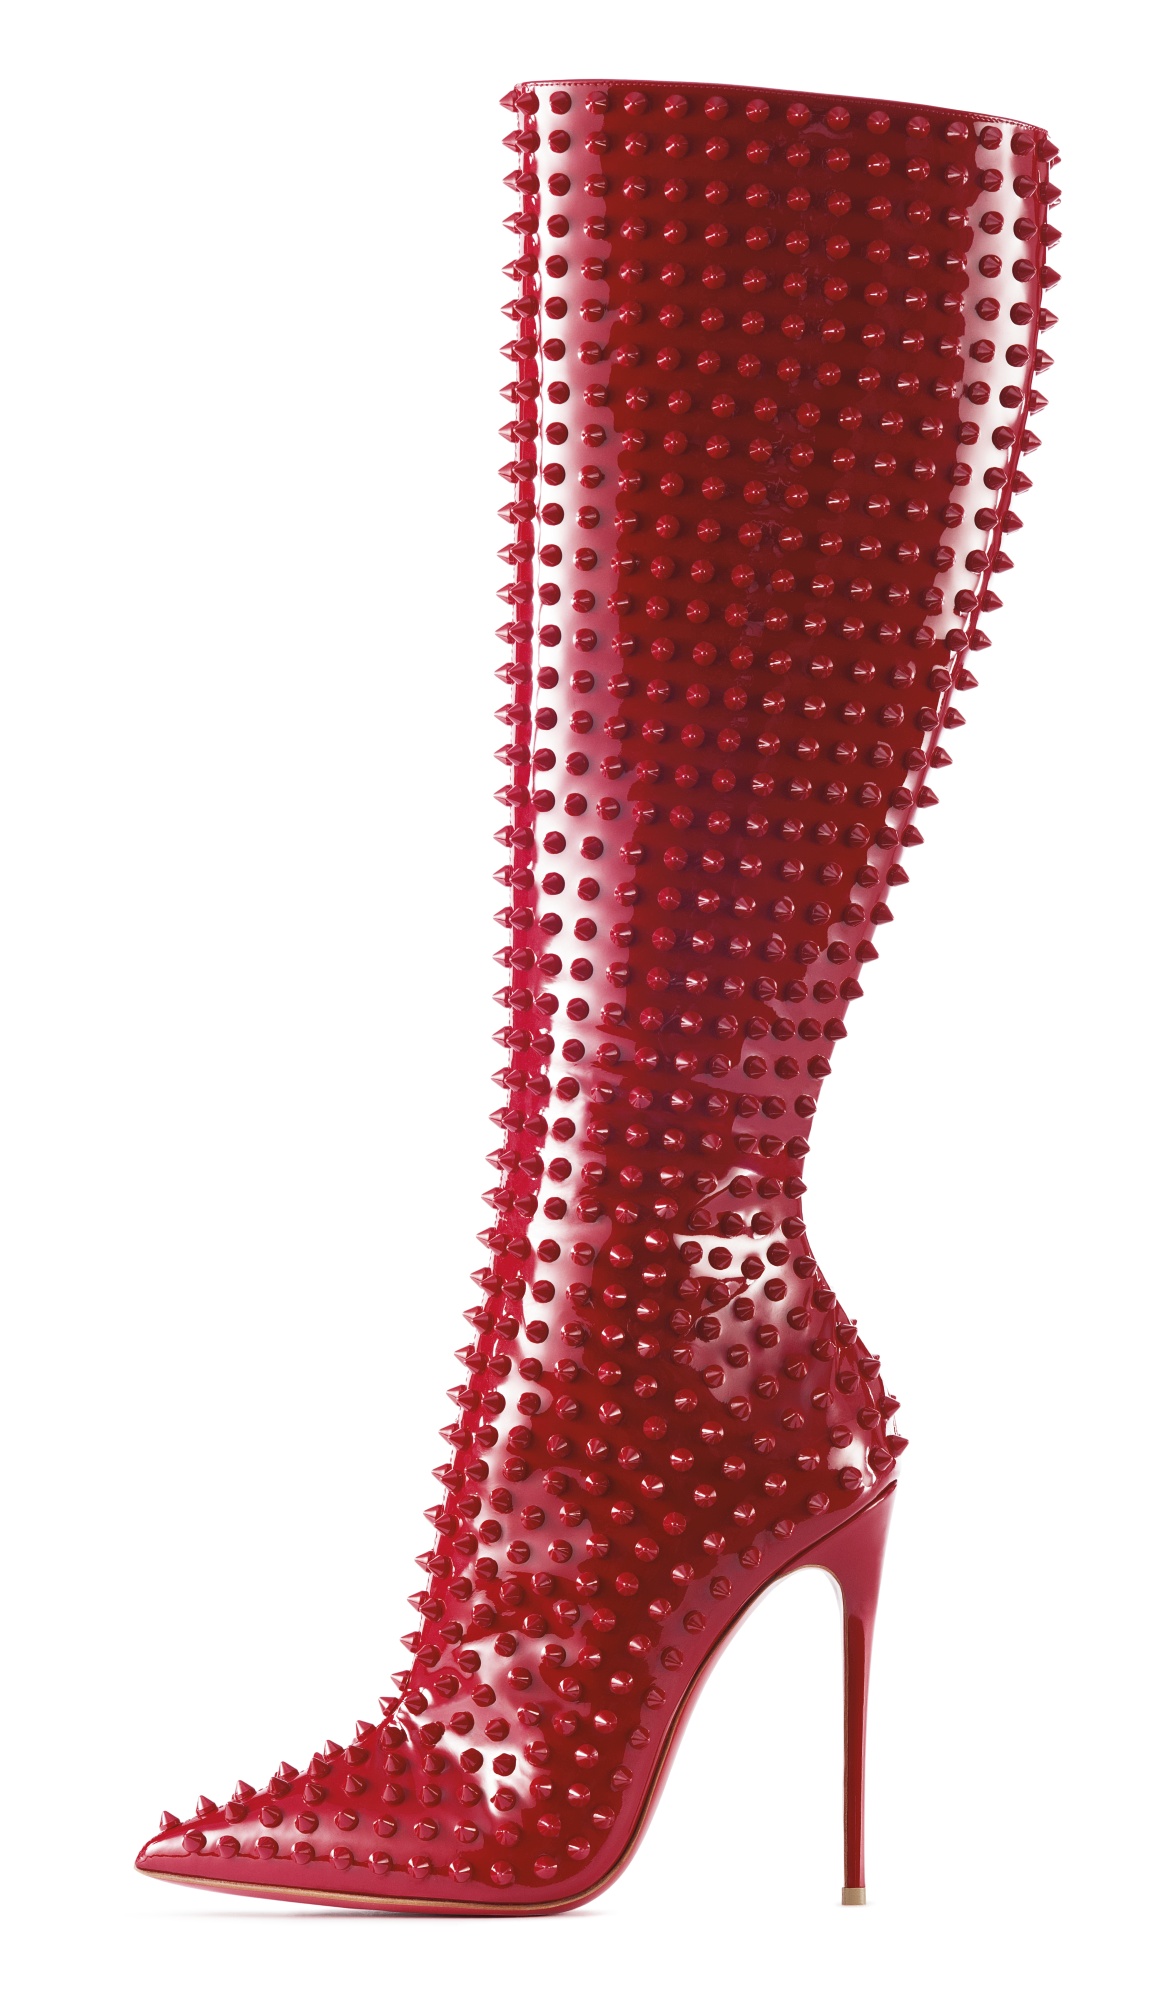 CHRISTIAN LOUBOUTIN RED boots 